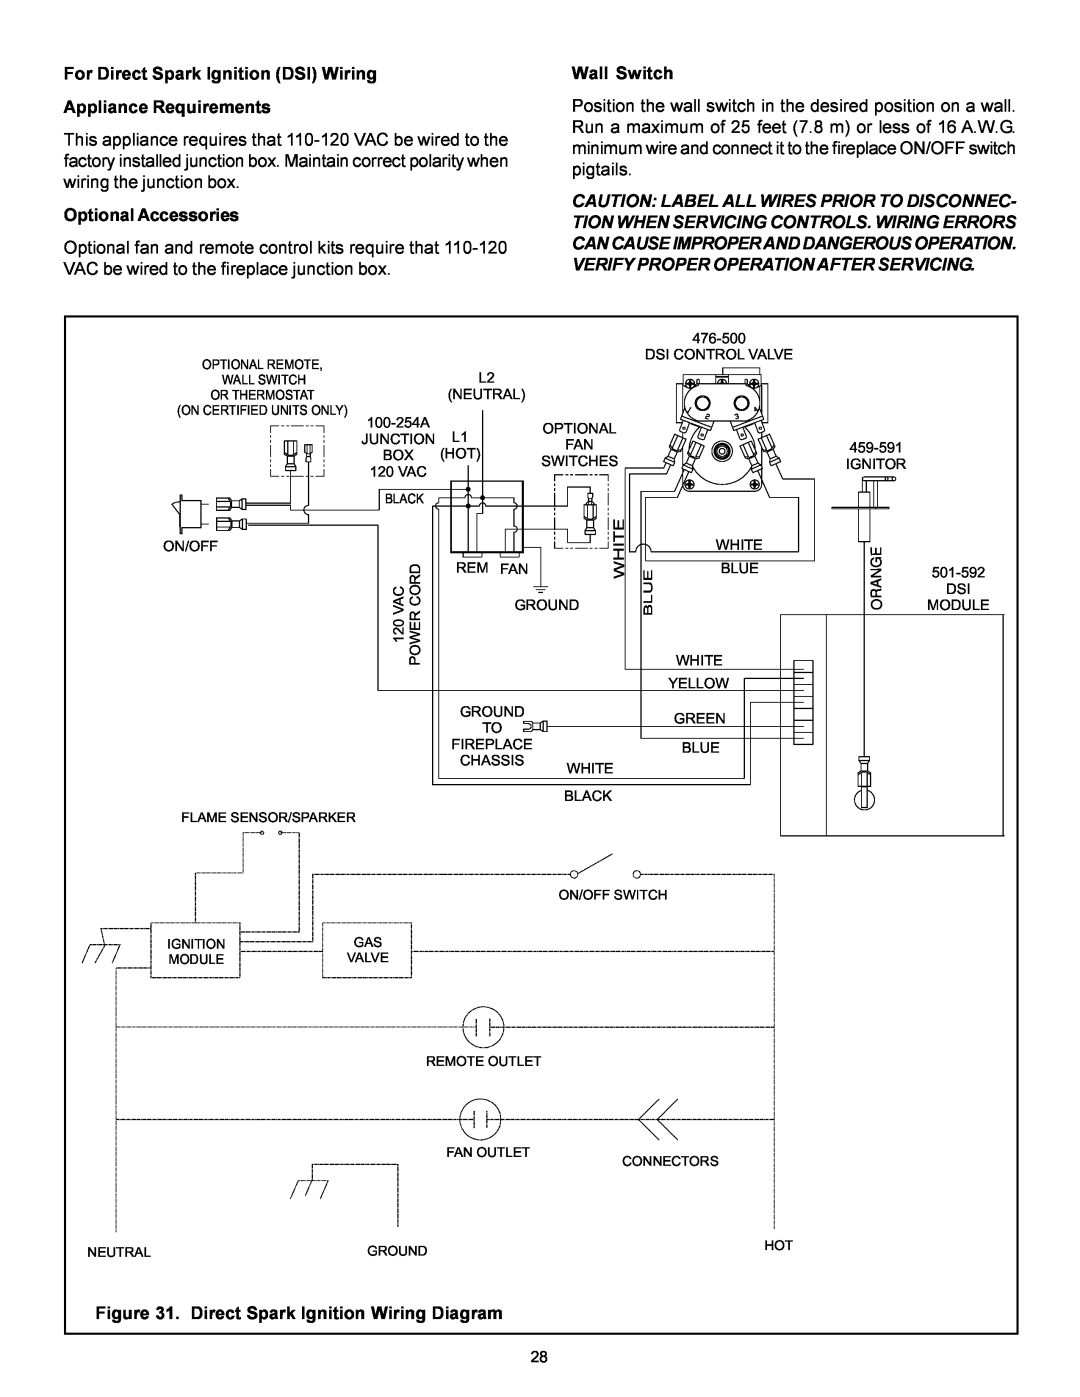 Heat & Glo LifeStyle BAY-38HV manual For Direct Spark Ignition DSI Wiring, Appliance Requirements, Optional Accessories 